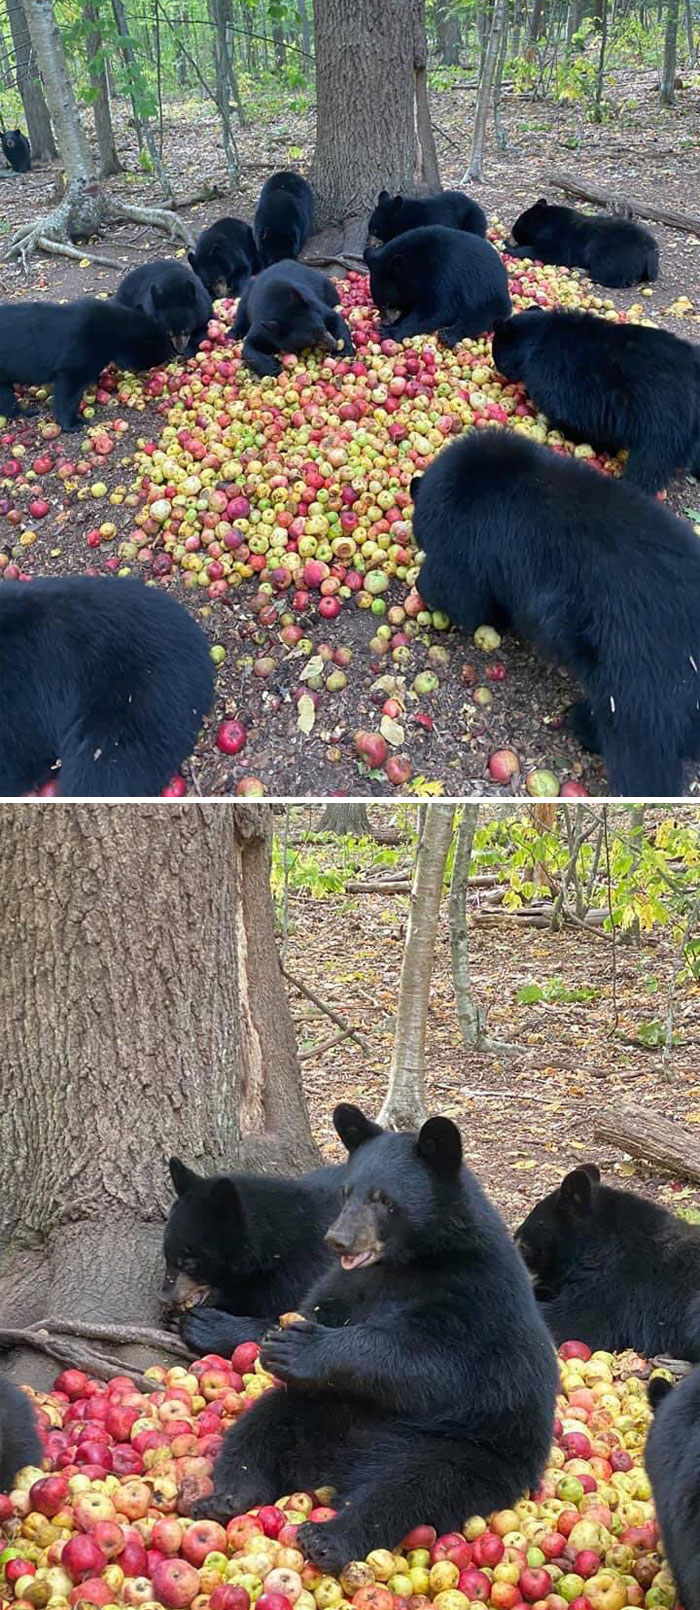 Just Some Black Bears Eating Some Apples In The Woods